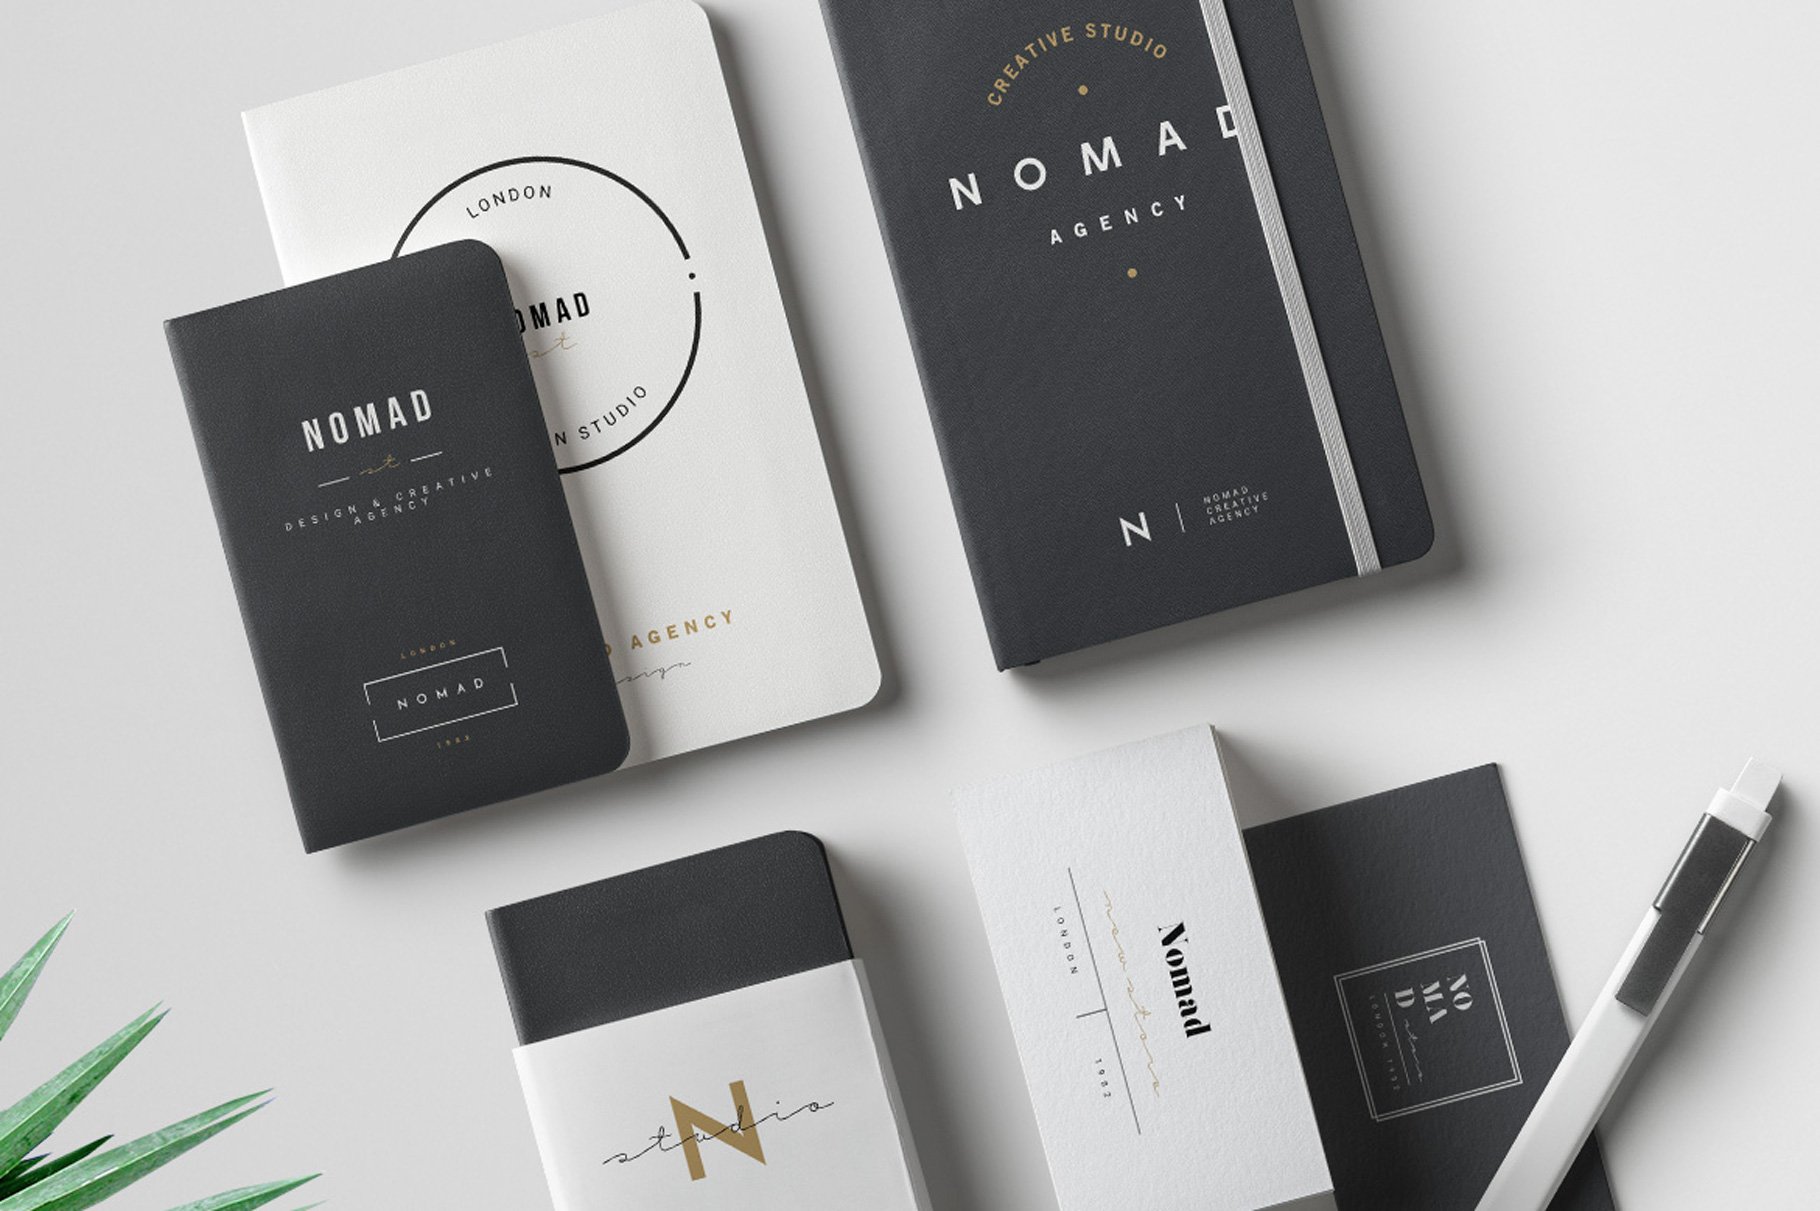 Nomad Brand Logos cover image.